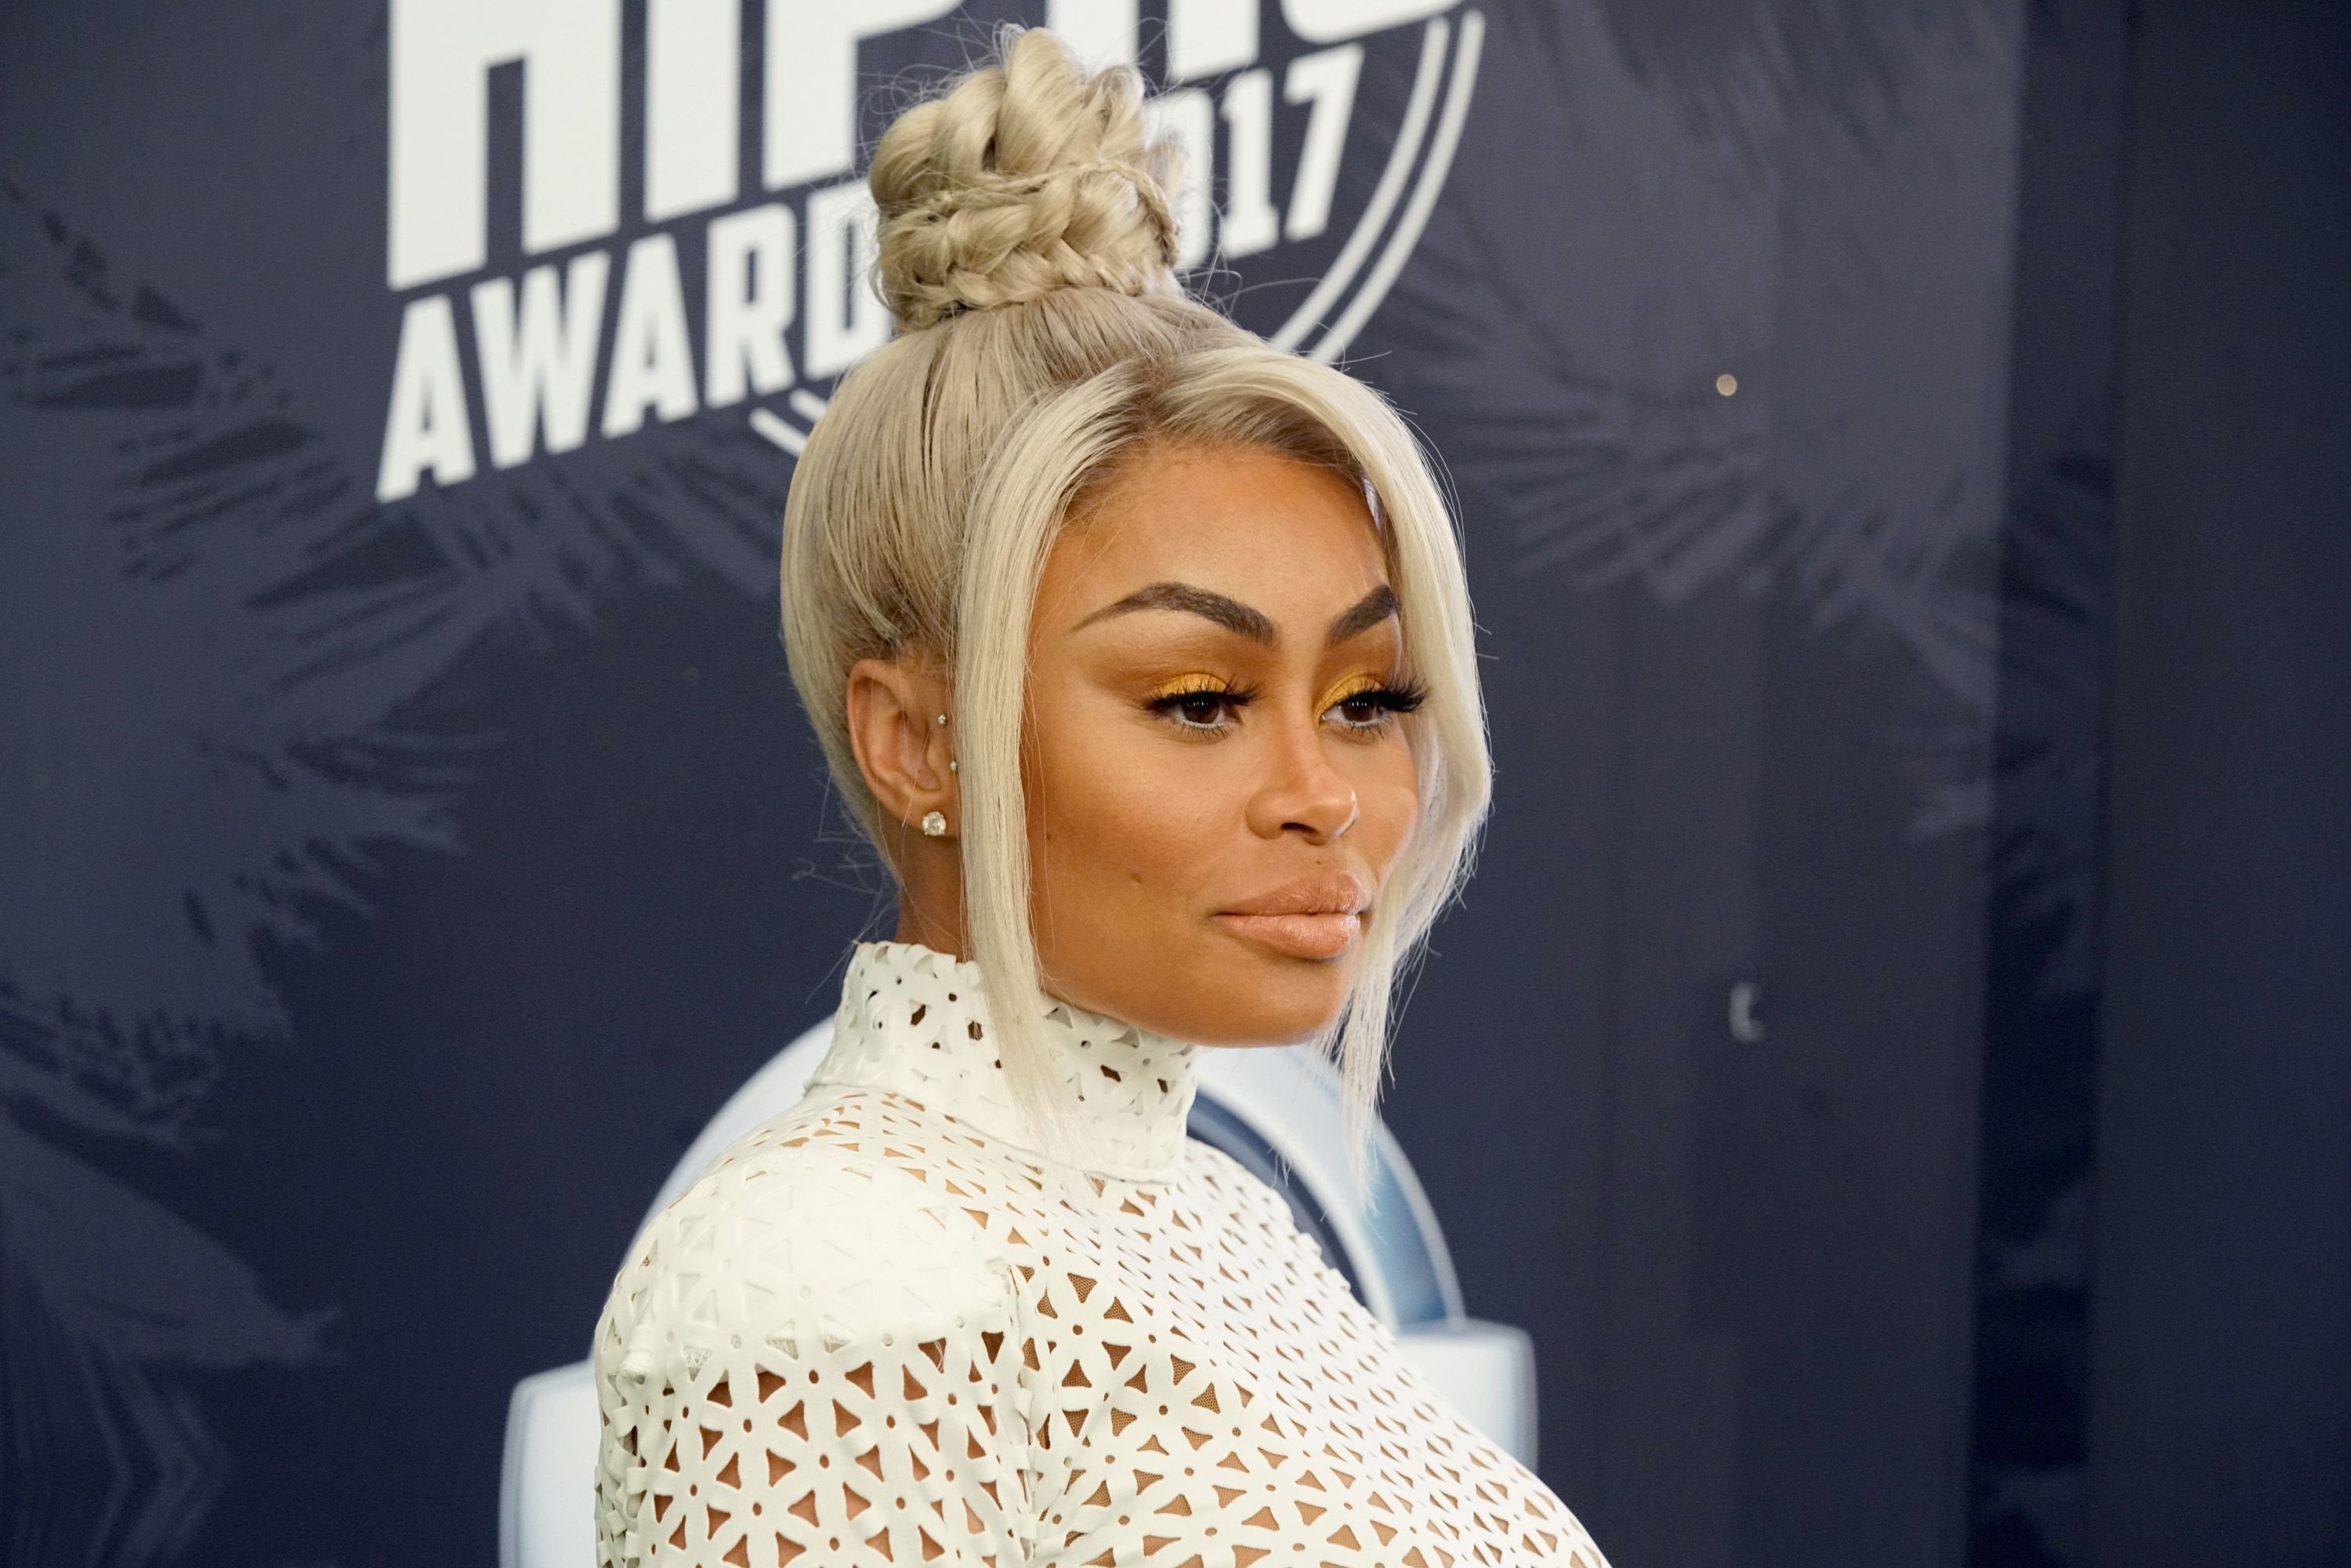 Reality star and entrepreneur Blac Chyna attends the 2017 BET Hip Hop Awards in Miami, Florida. | Photo: Getty Images